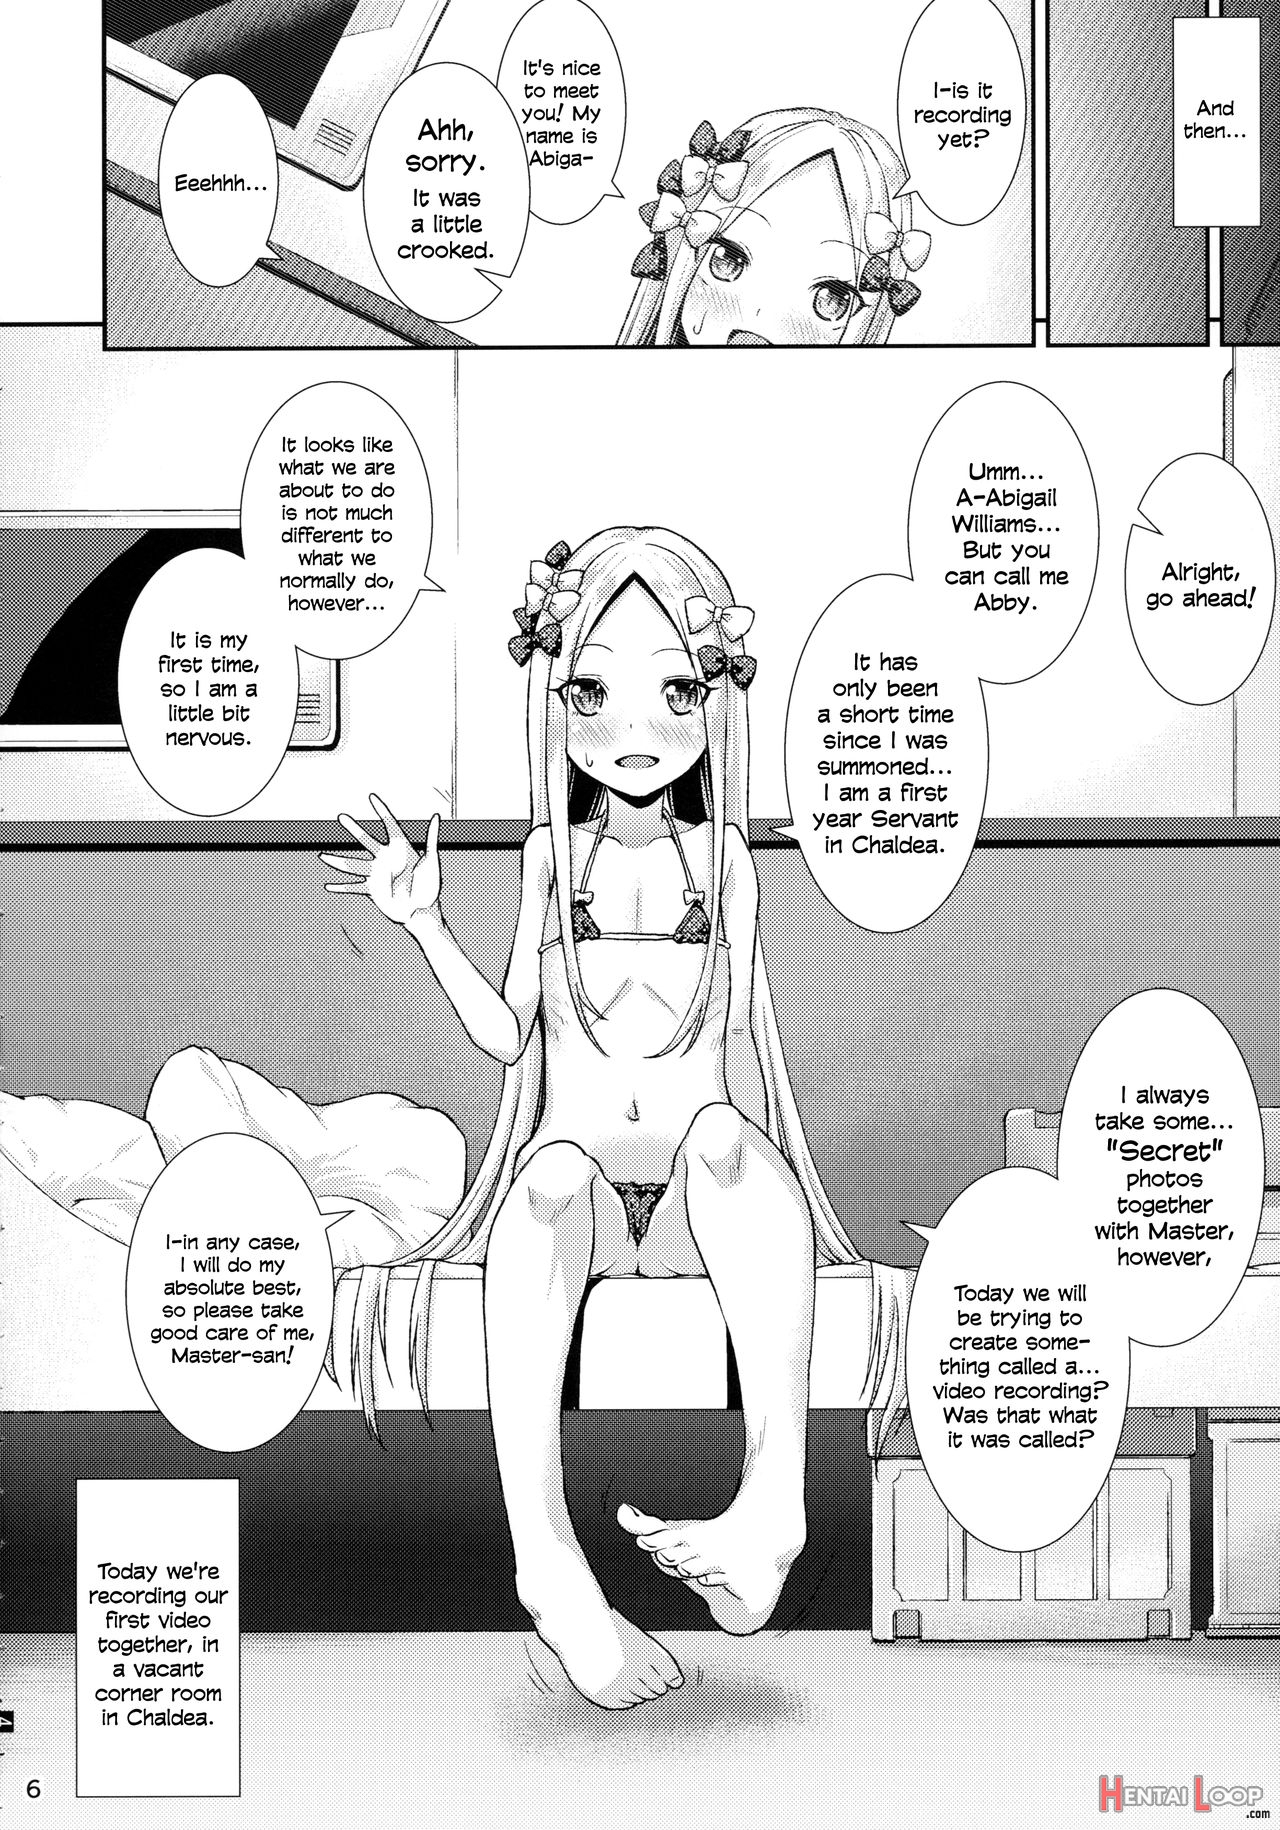 Page 3 of Abby And The Secret Homemade Sex Tape (by Yamazaki Kana) picture